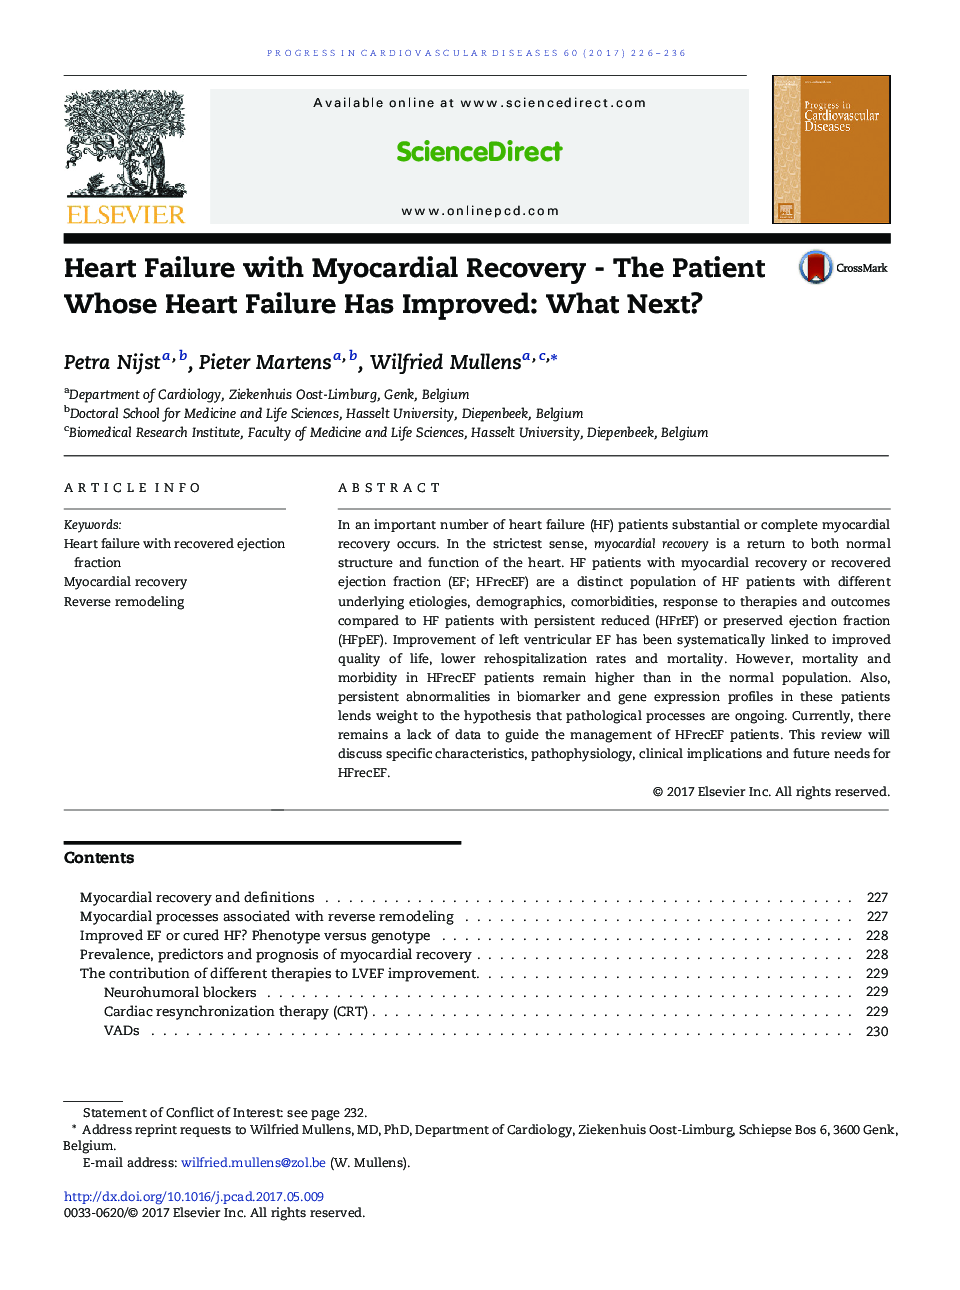 Heart Failure with Myocardial Recovery - The Patient Whose Heart Failure Has Improved: What Next?